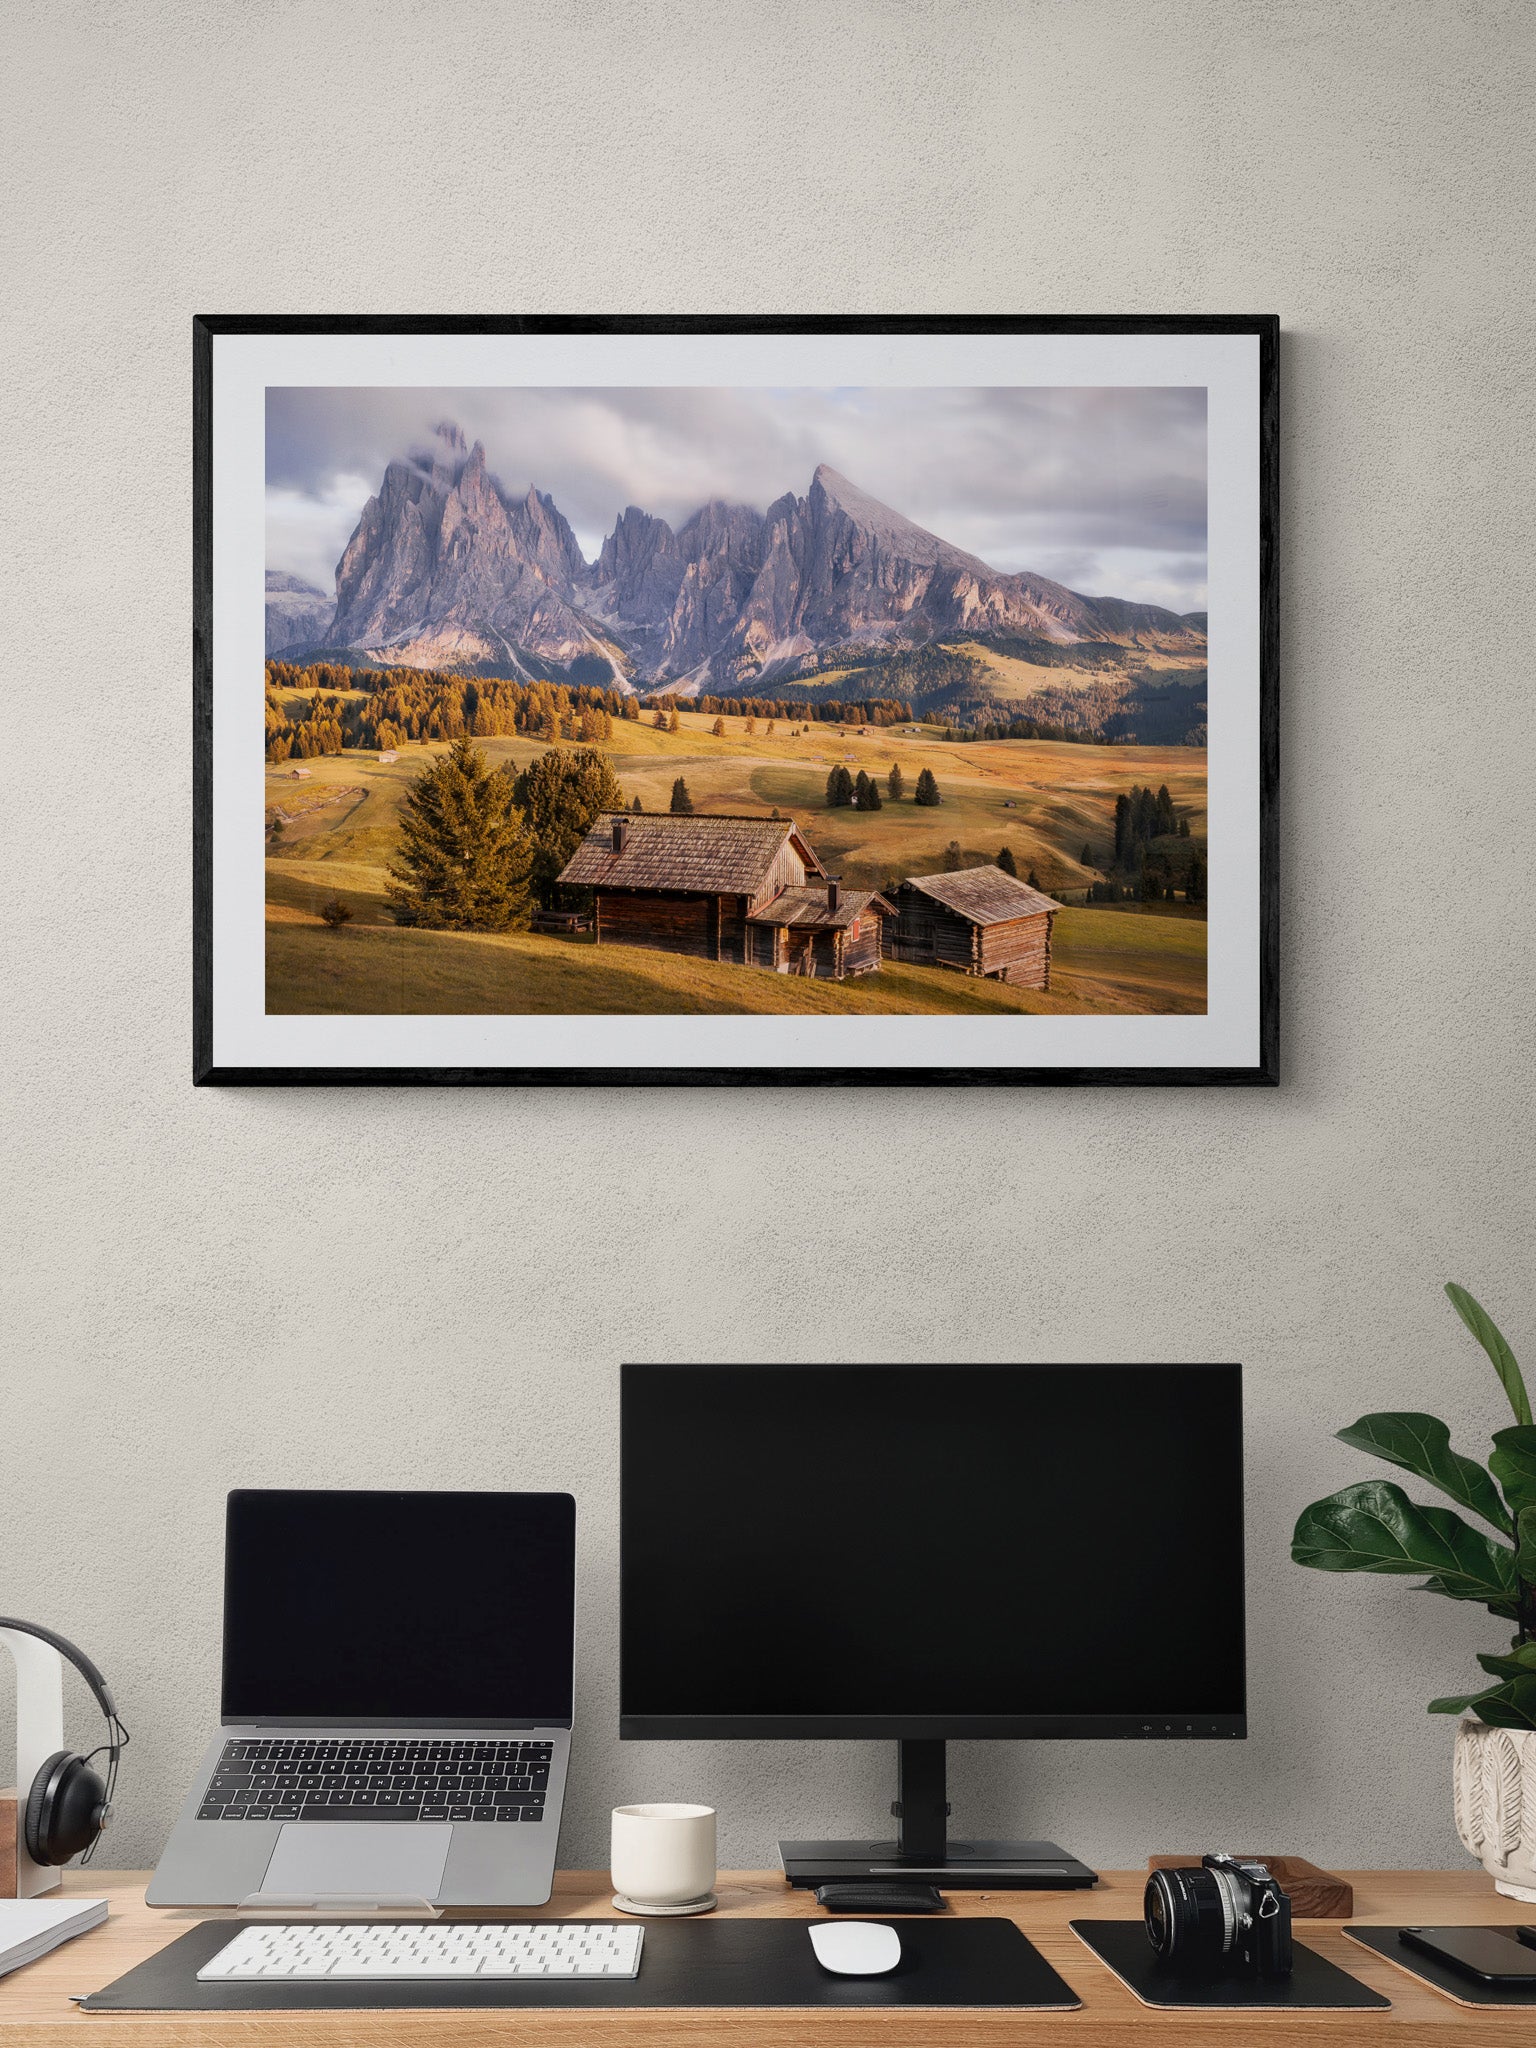 Image Title: A Tyrol Tidbit Photographer: Marcus Danz Location: Alpe di Siusi, Italy Image description: While increasingly dense clouds pass by the peaks of the mighty Sassolungo group, the pasture catches the warm light of the soon-to-set sun one more time. High quality Fine Art print up to 36 inch / around 90 centimeters on Hahnemühle paper available. Large variant over computer desk.